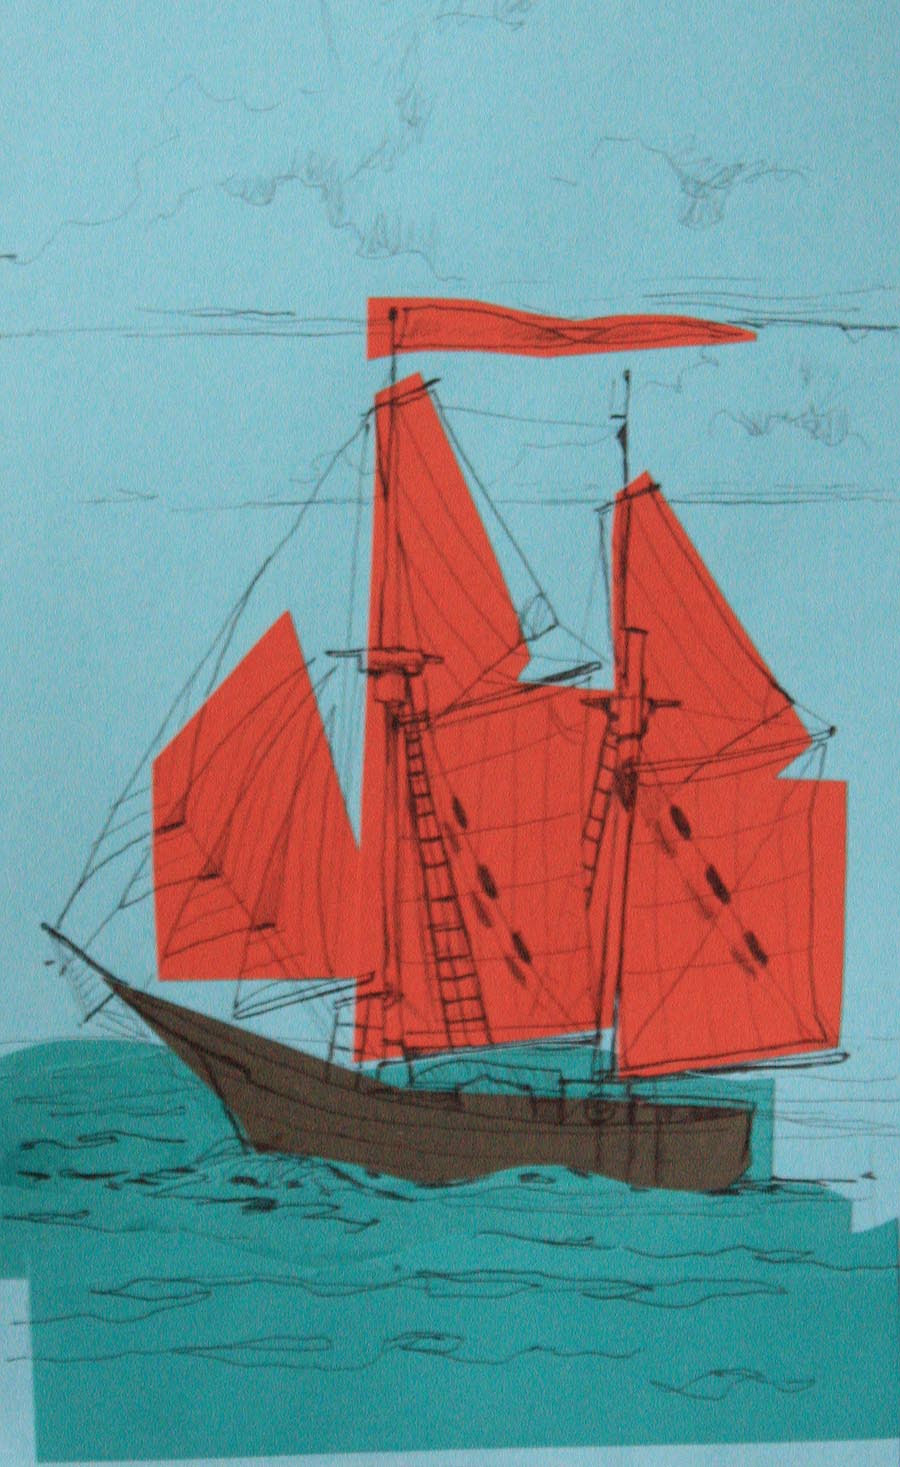 a red sailing ship floating on a body of water